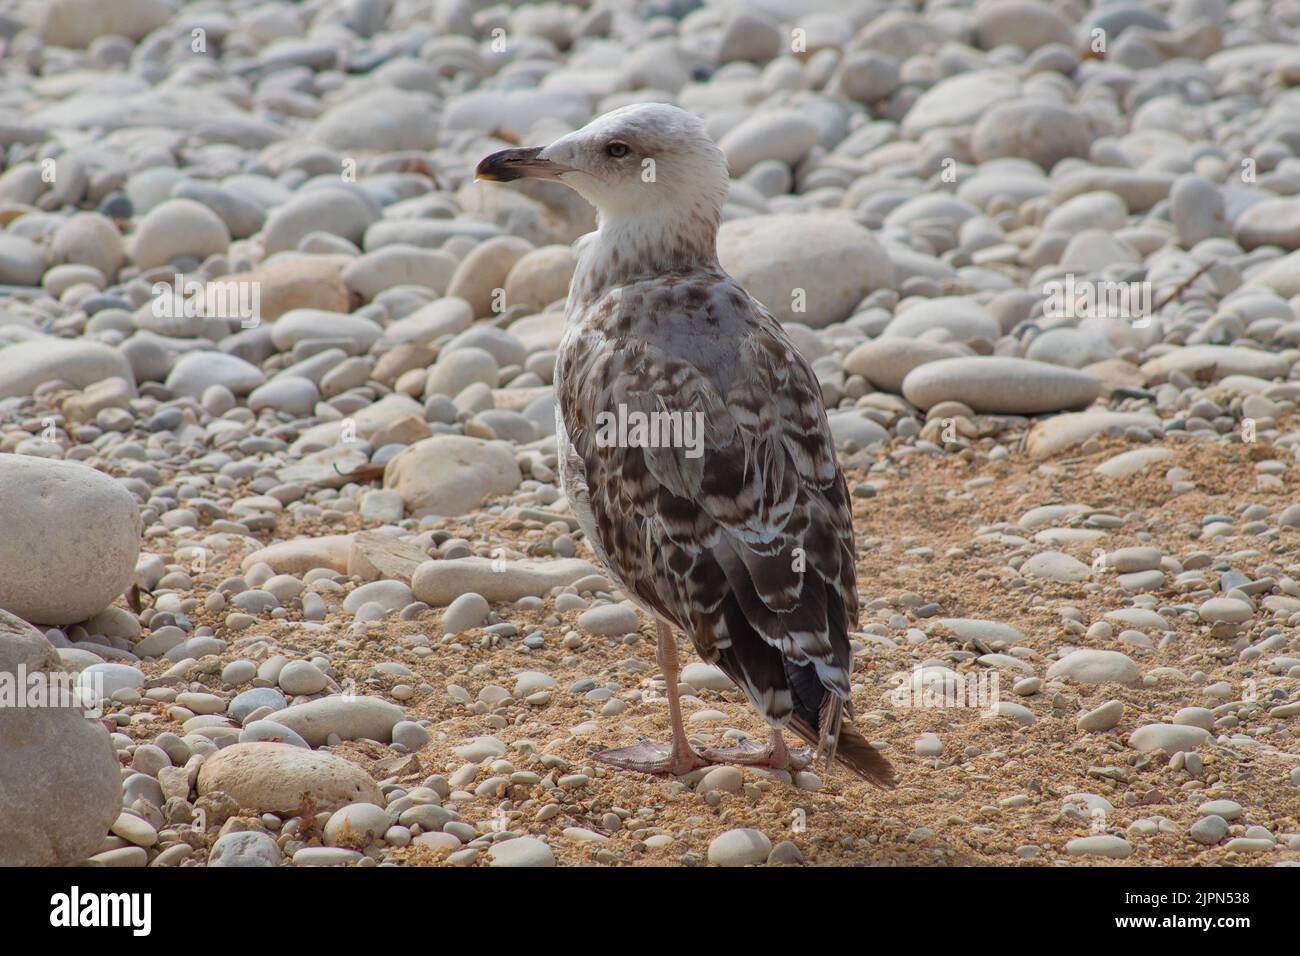 A seagull walking on the beach. Stock Photo